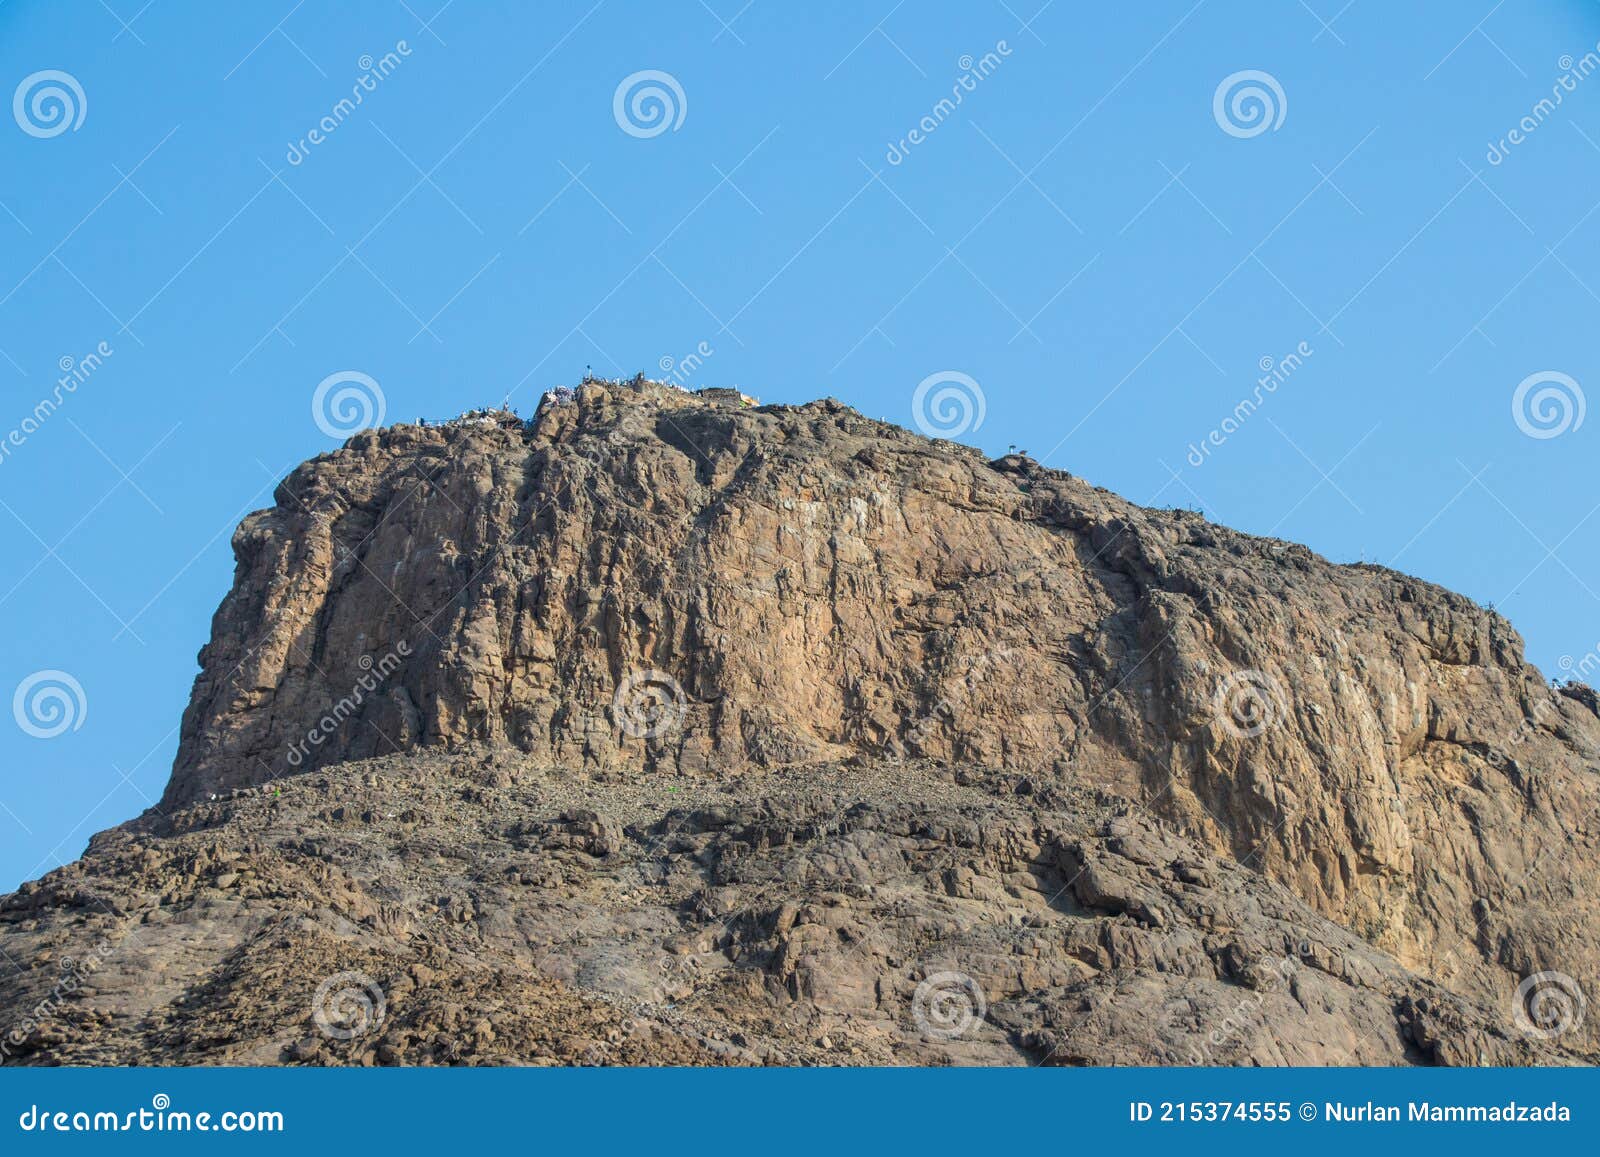 jabal an-nour. magnificent view of the top of jabal nur, where hira cave is situated.